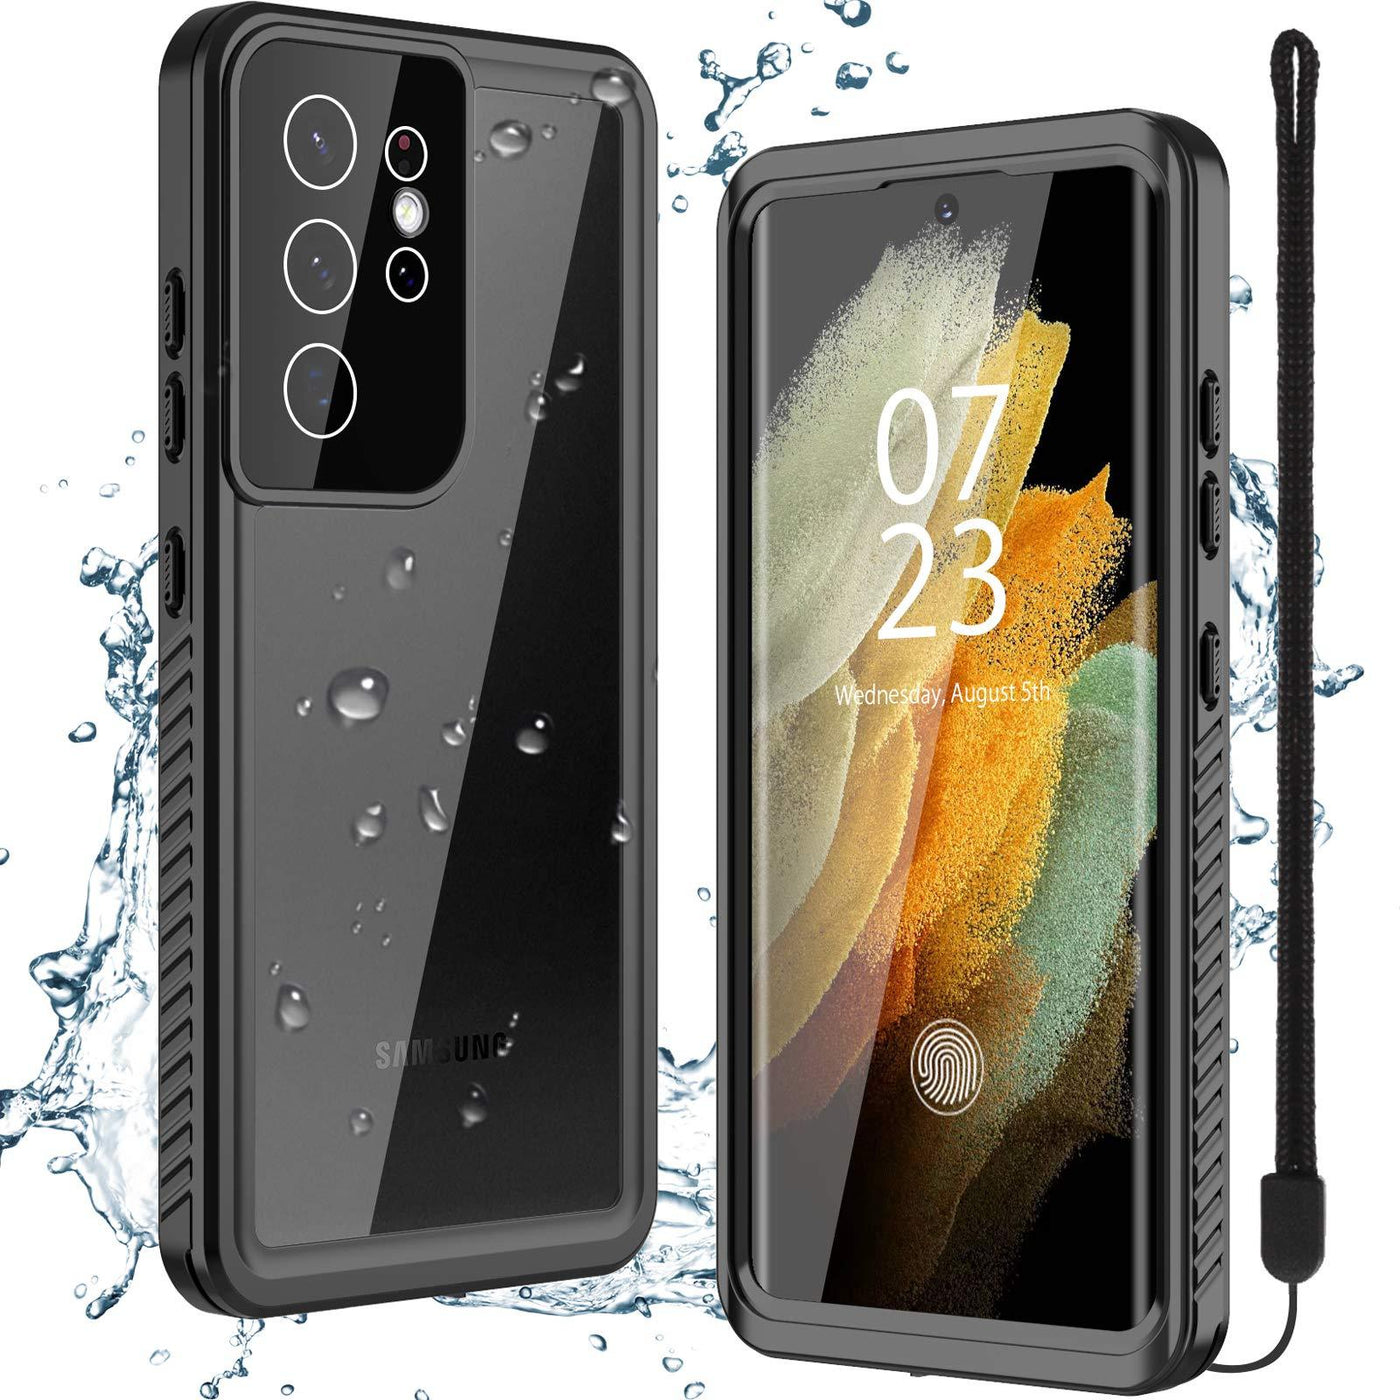 Nineasy For Samsung Galaxy S21 Ultra Case Galaxy S21 Ultra Waterproof Case With Built In Screen Protector 360 Full Body Protective Heavy Duty Shockproof Clear Cover For Galaxy S21 Ultra 6 8 5g 21 Black